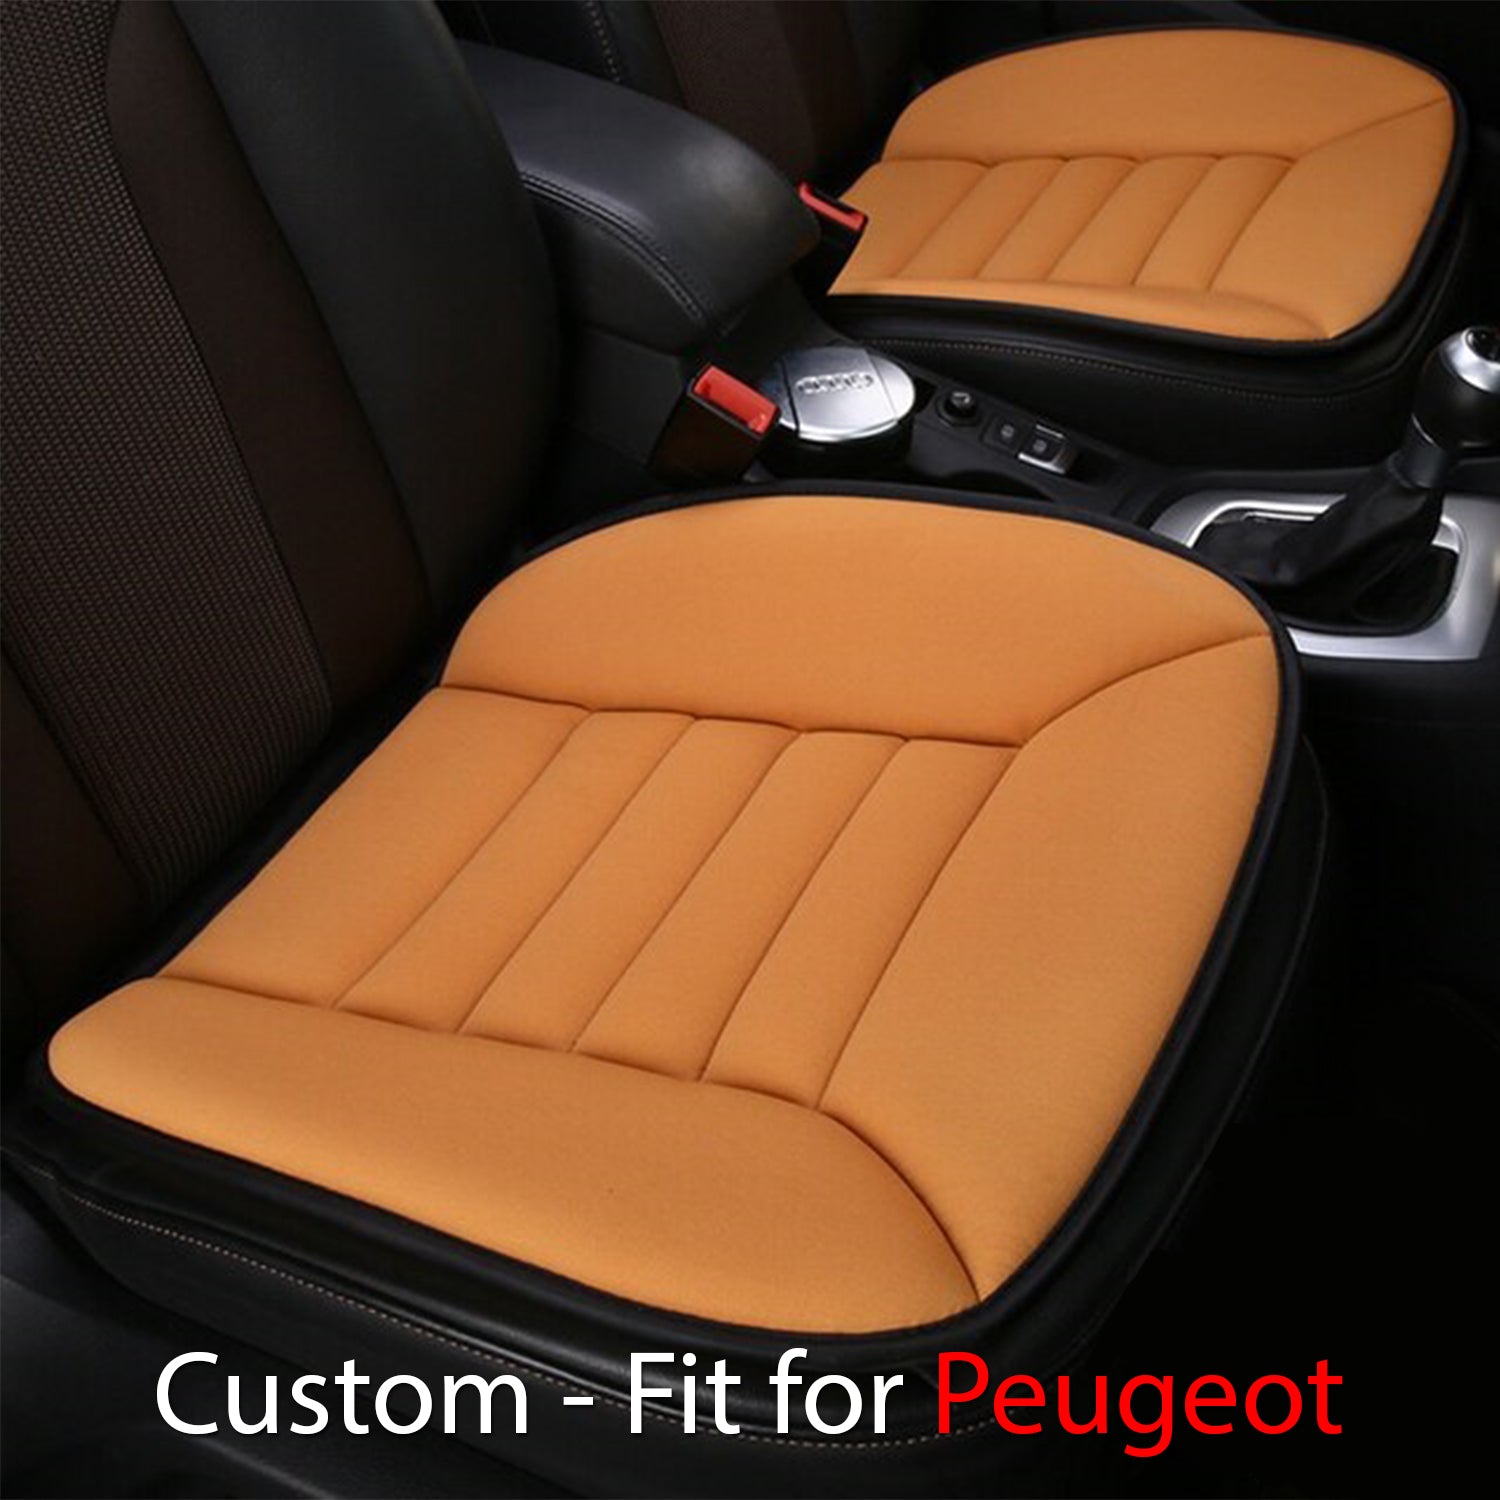 Car Seat Cushion with 1.2inch Comfort Memory Foam, Custom-Fit For Car, Seat Cushion for Car and Office Chair DLPE247